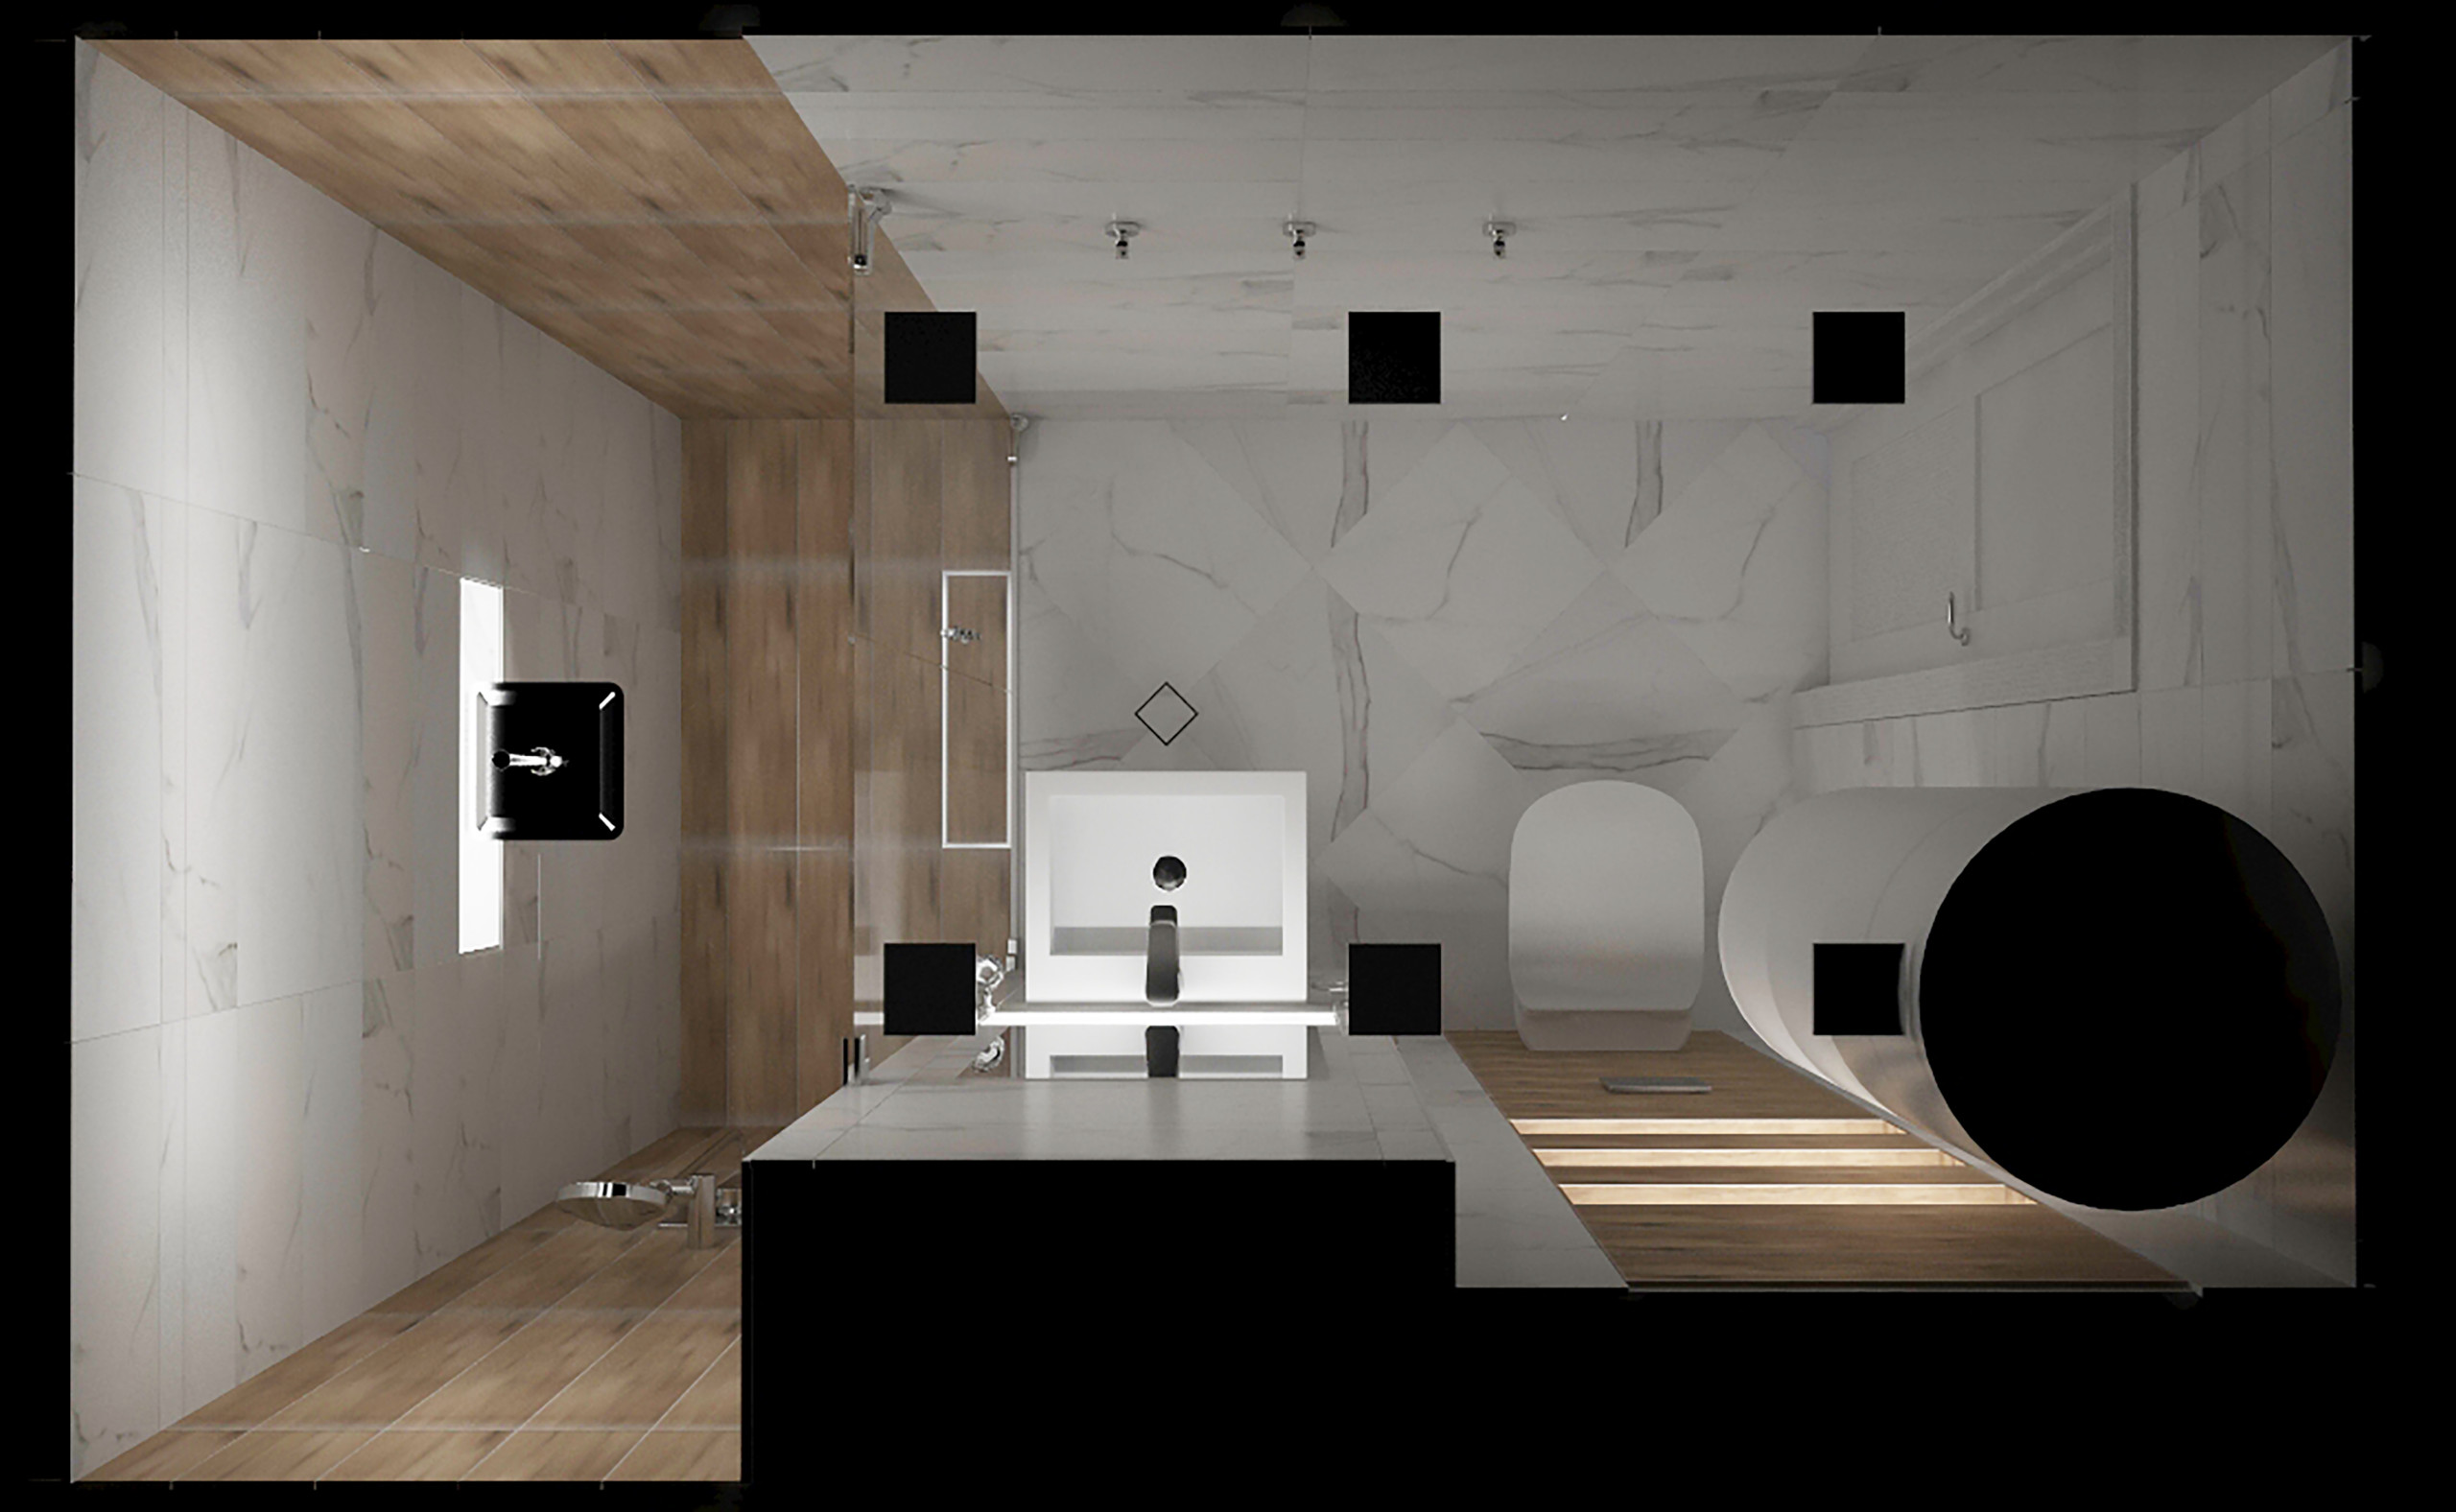 3D visualization of a bathroom